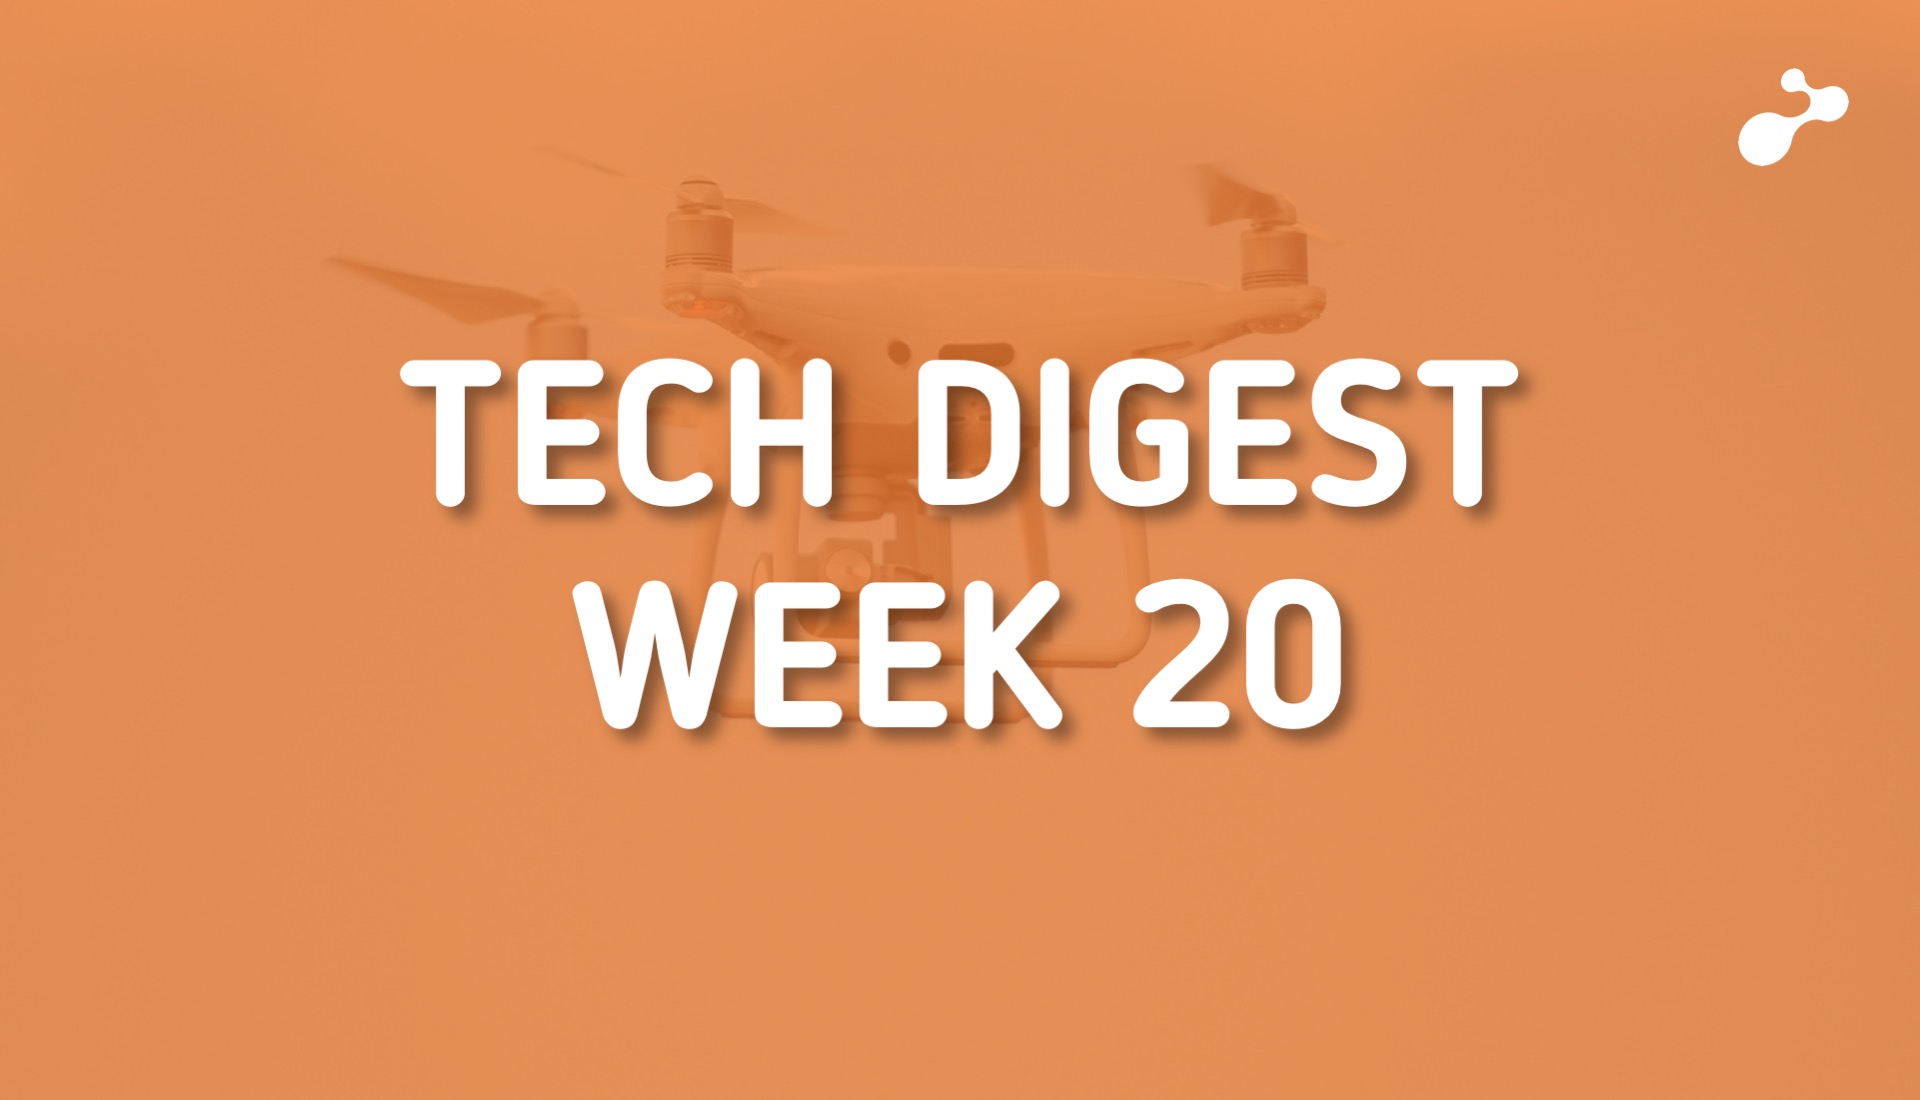 Top global technology trends to watch this week - Week 20, 2019